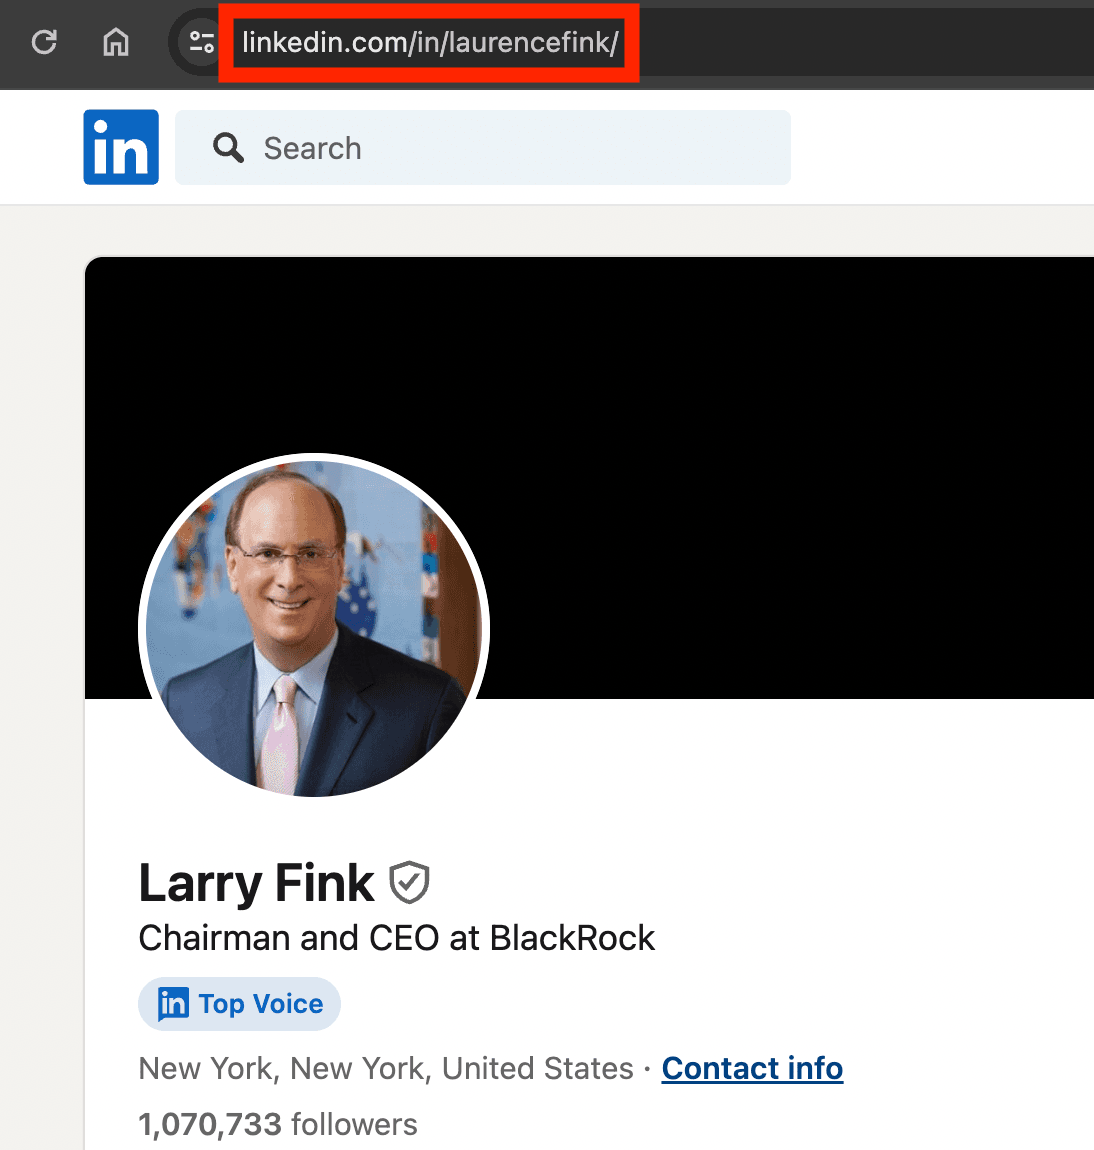 the elegance of power linkedin url example - image11.png